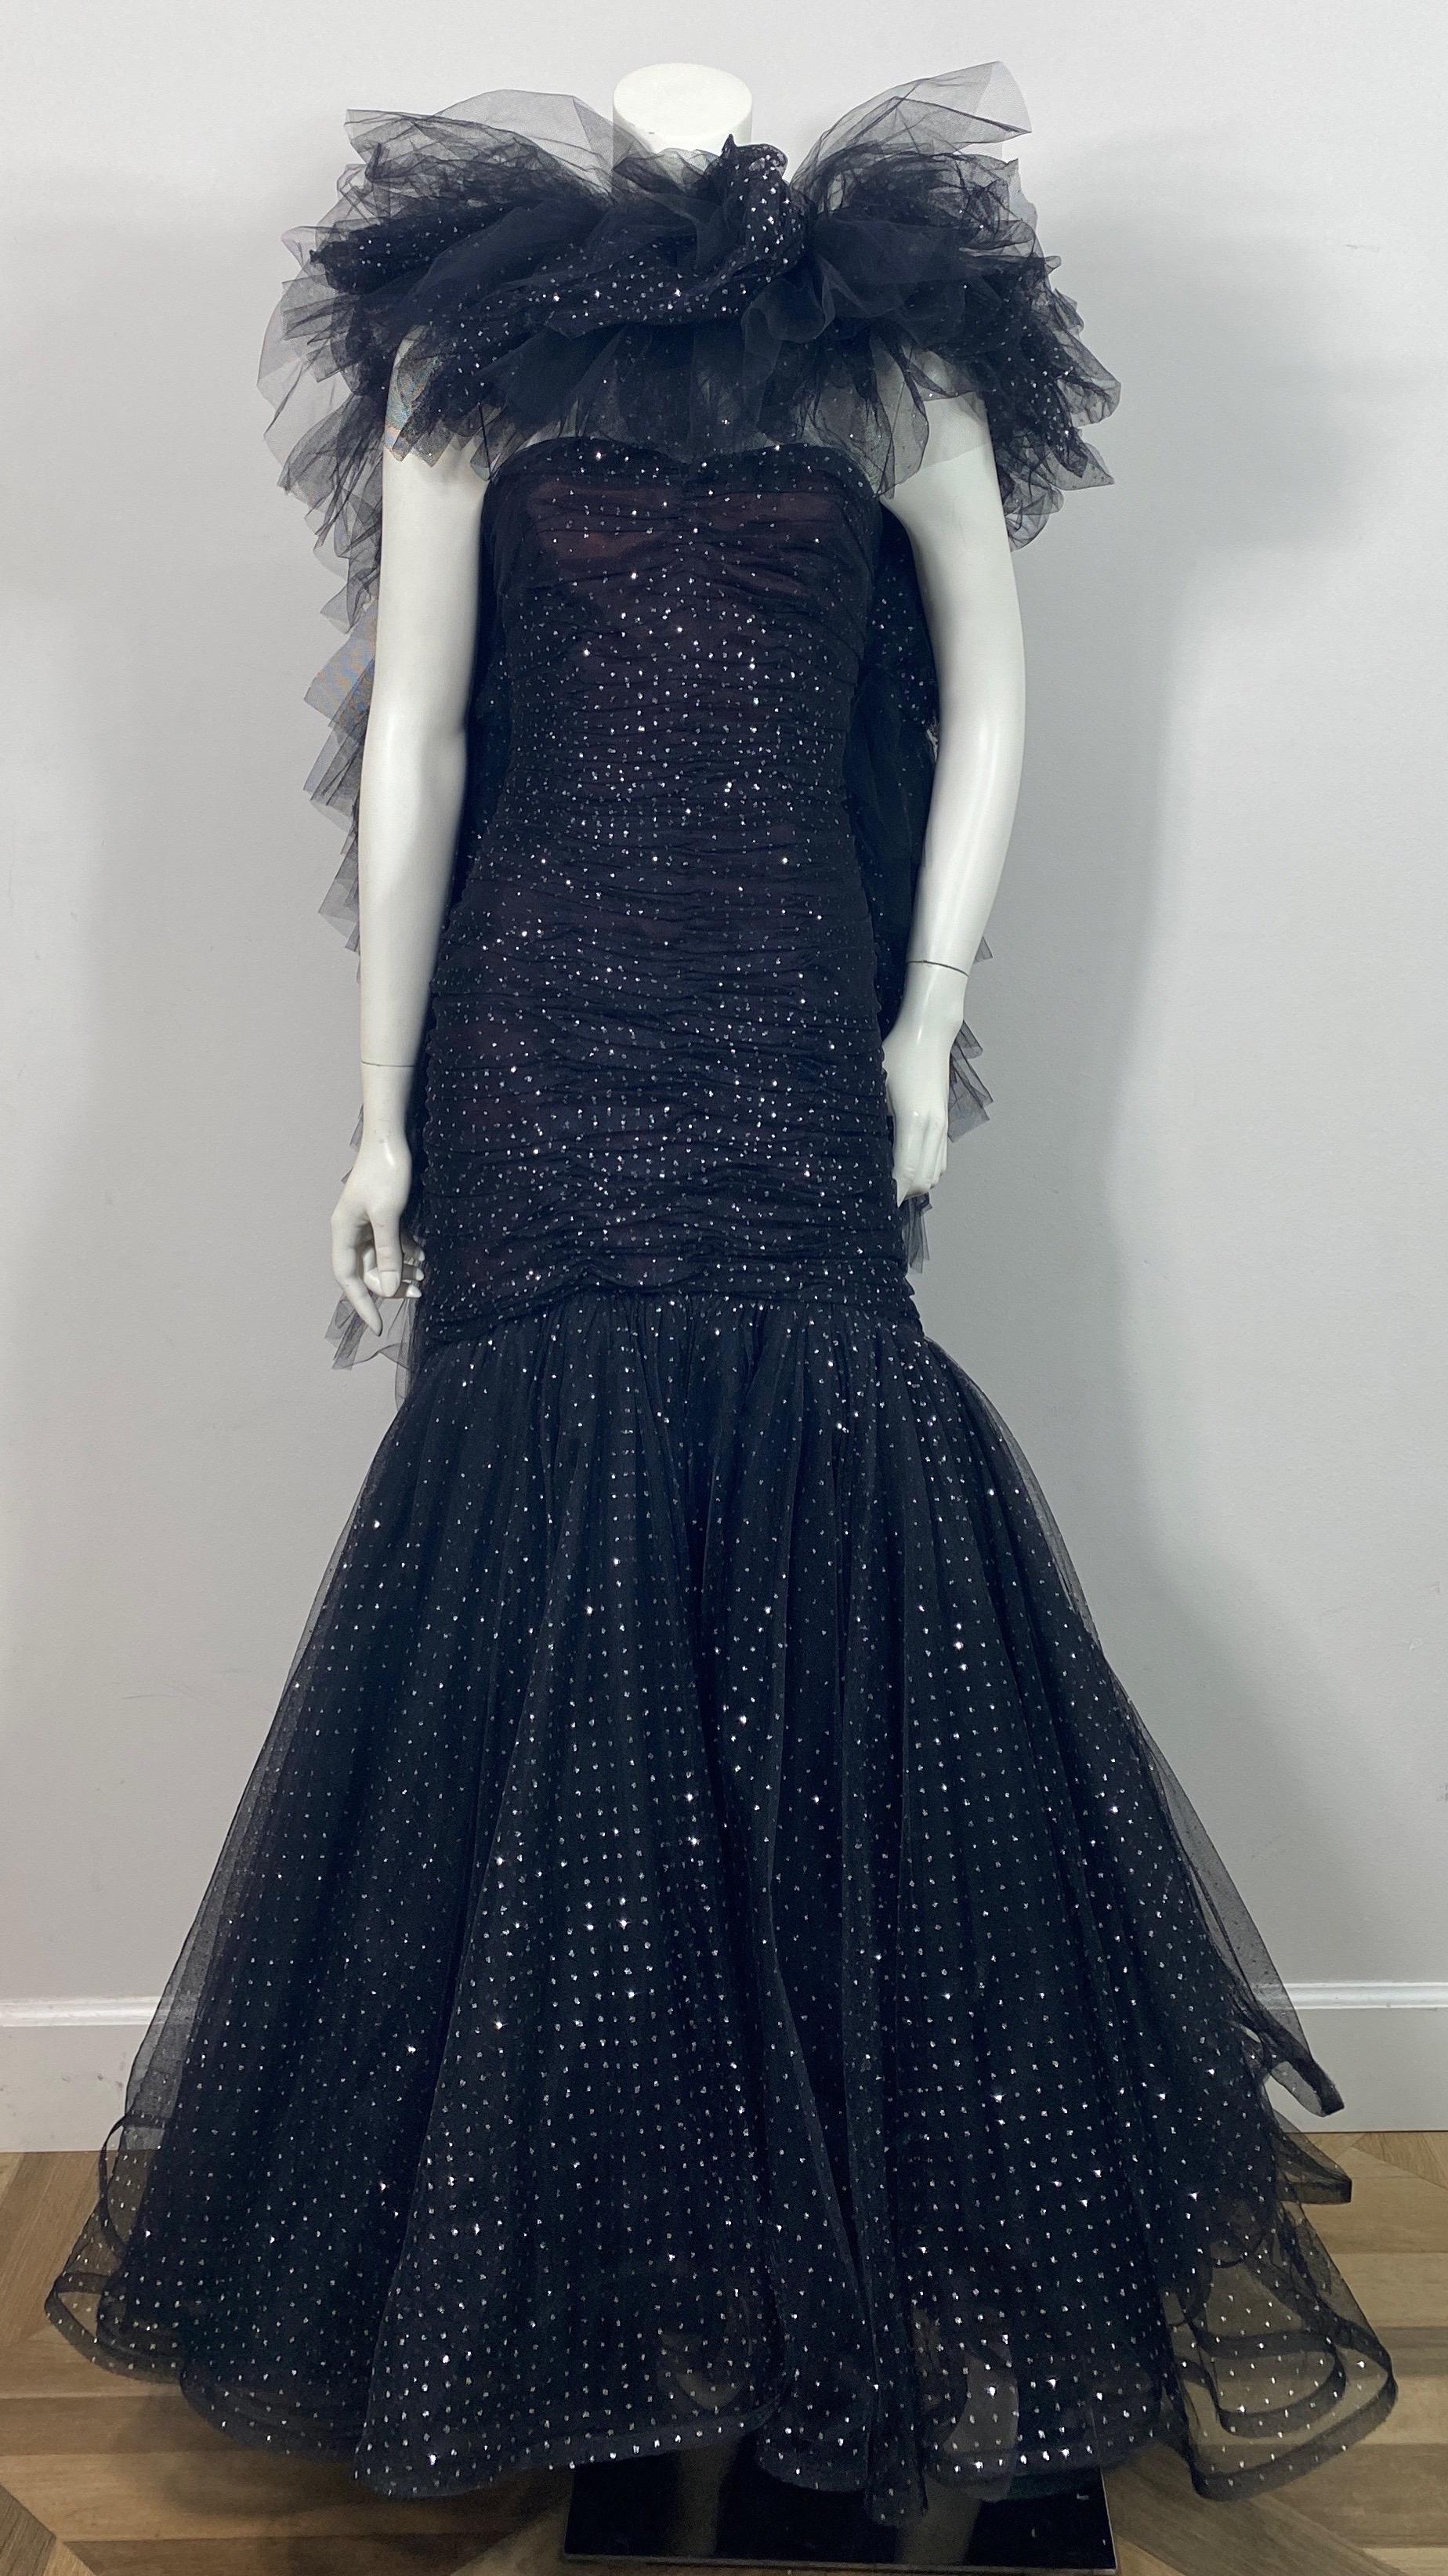 Murray Arbeid 1990 Black and Silver Tulle Gown with boa style shawl - Size 8 This late 1980’s or Early 1990’s gown is made of multi layers of tulle and a Black Point D’Esprit that has silver detail. The top bodice of the strapless gown has a built